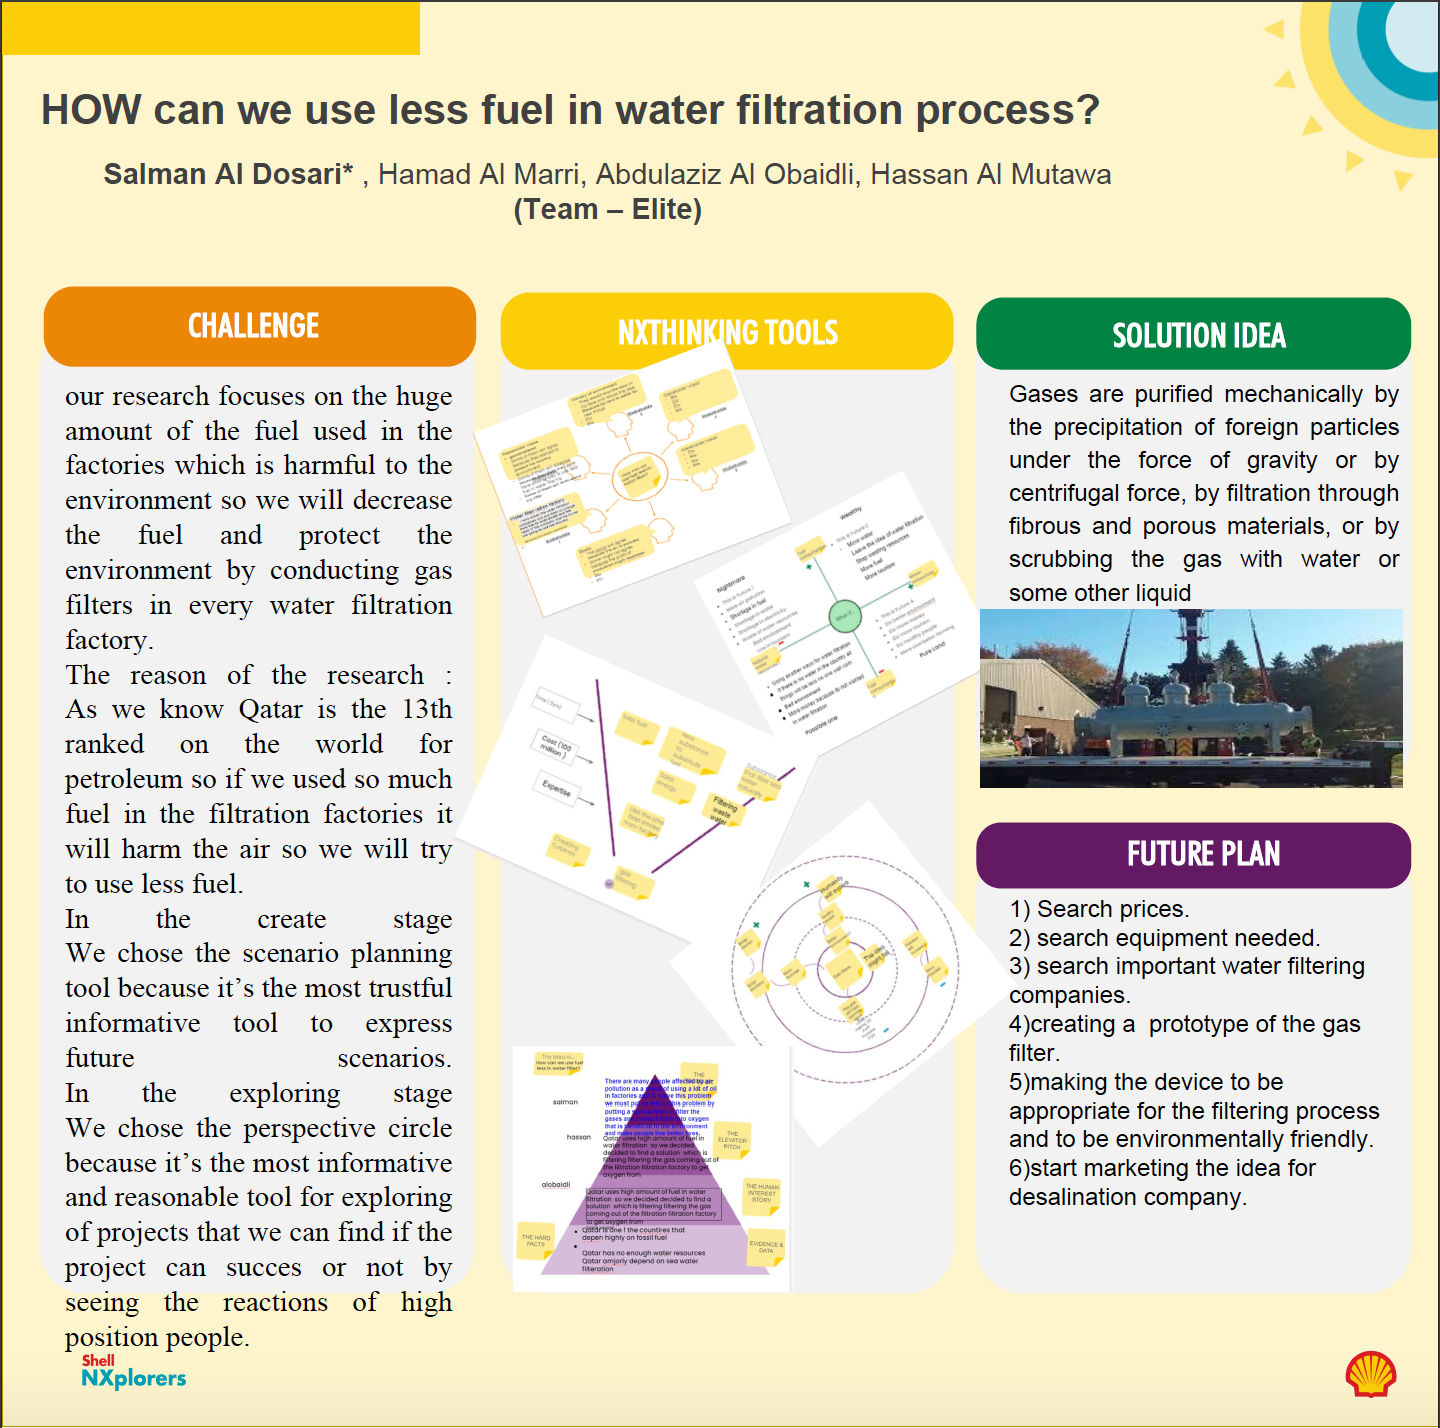 How can we use less fuel in water filtration process?